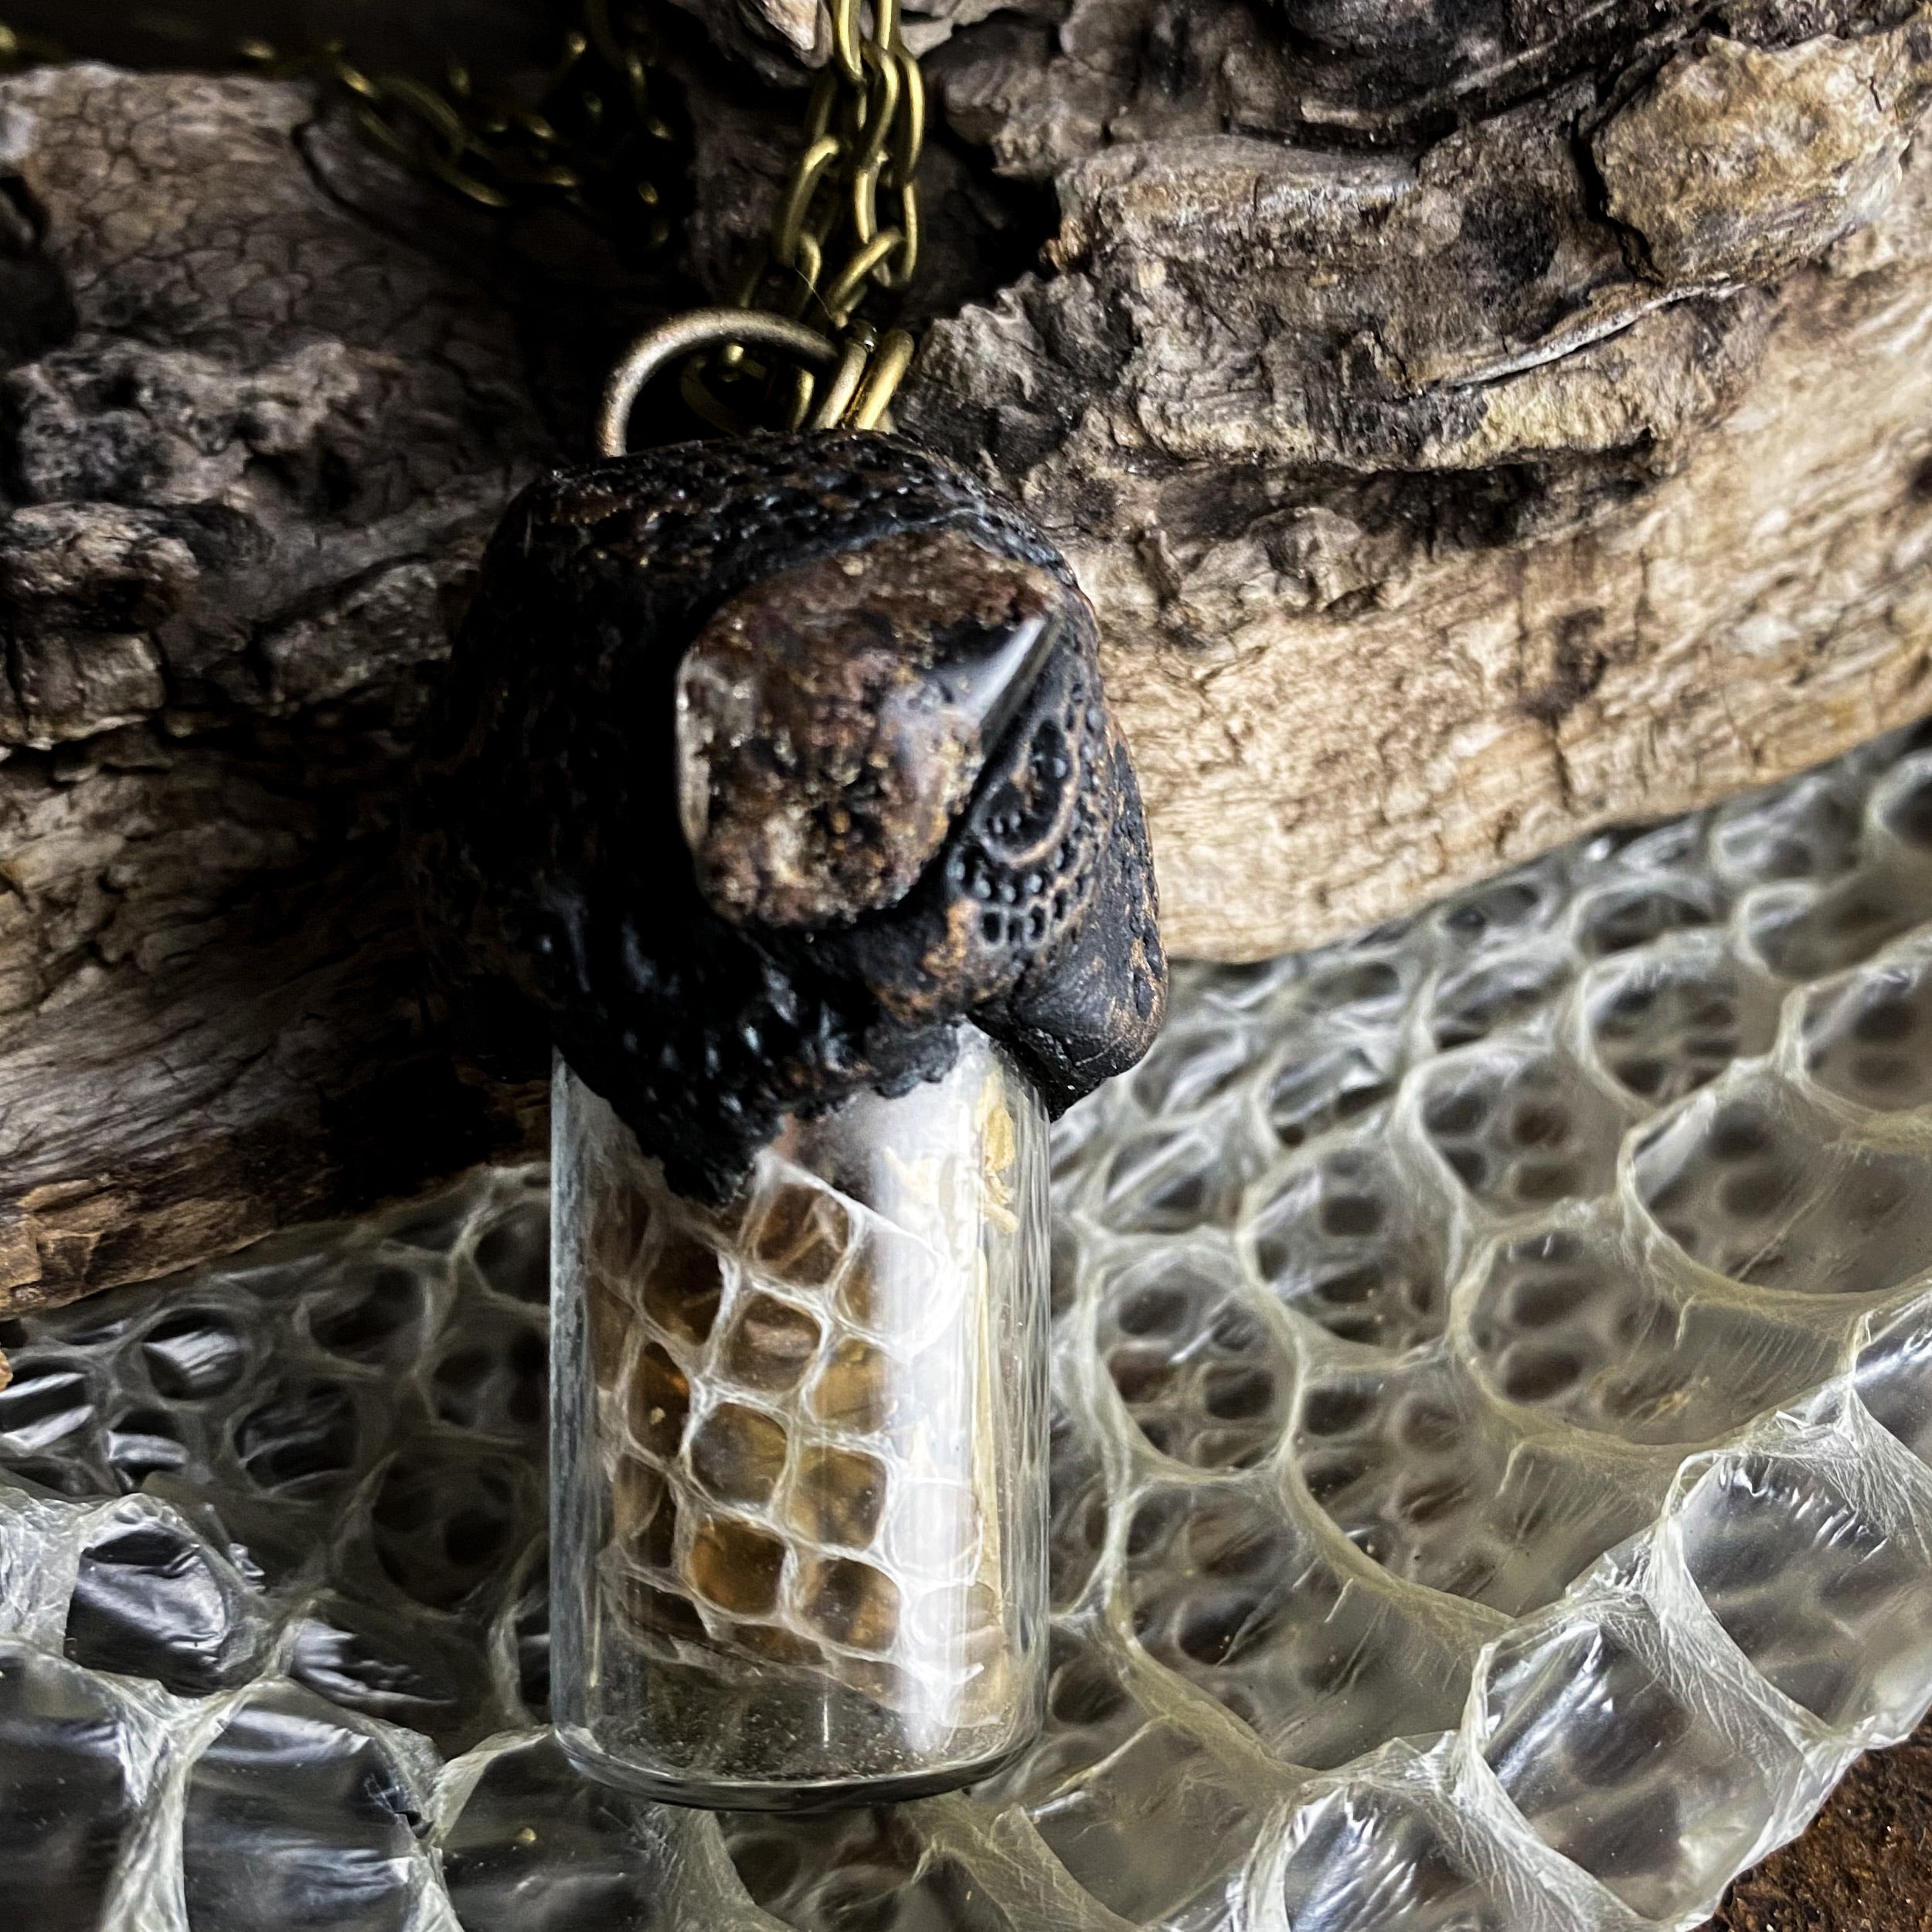 Conjure Necklace with Snake Skin, Ghost Quartz and Motherwort